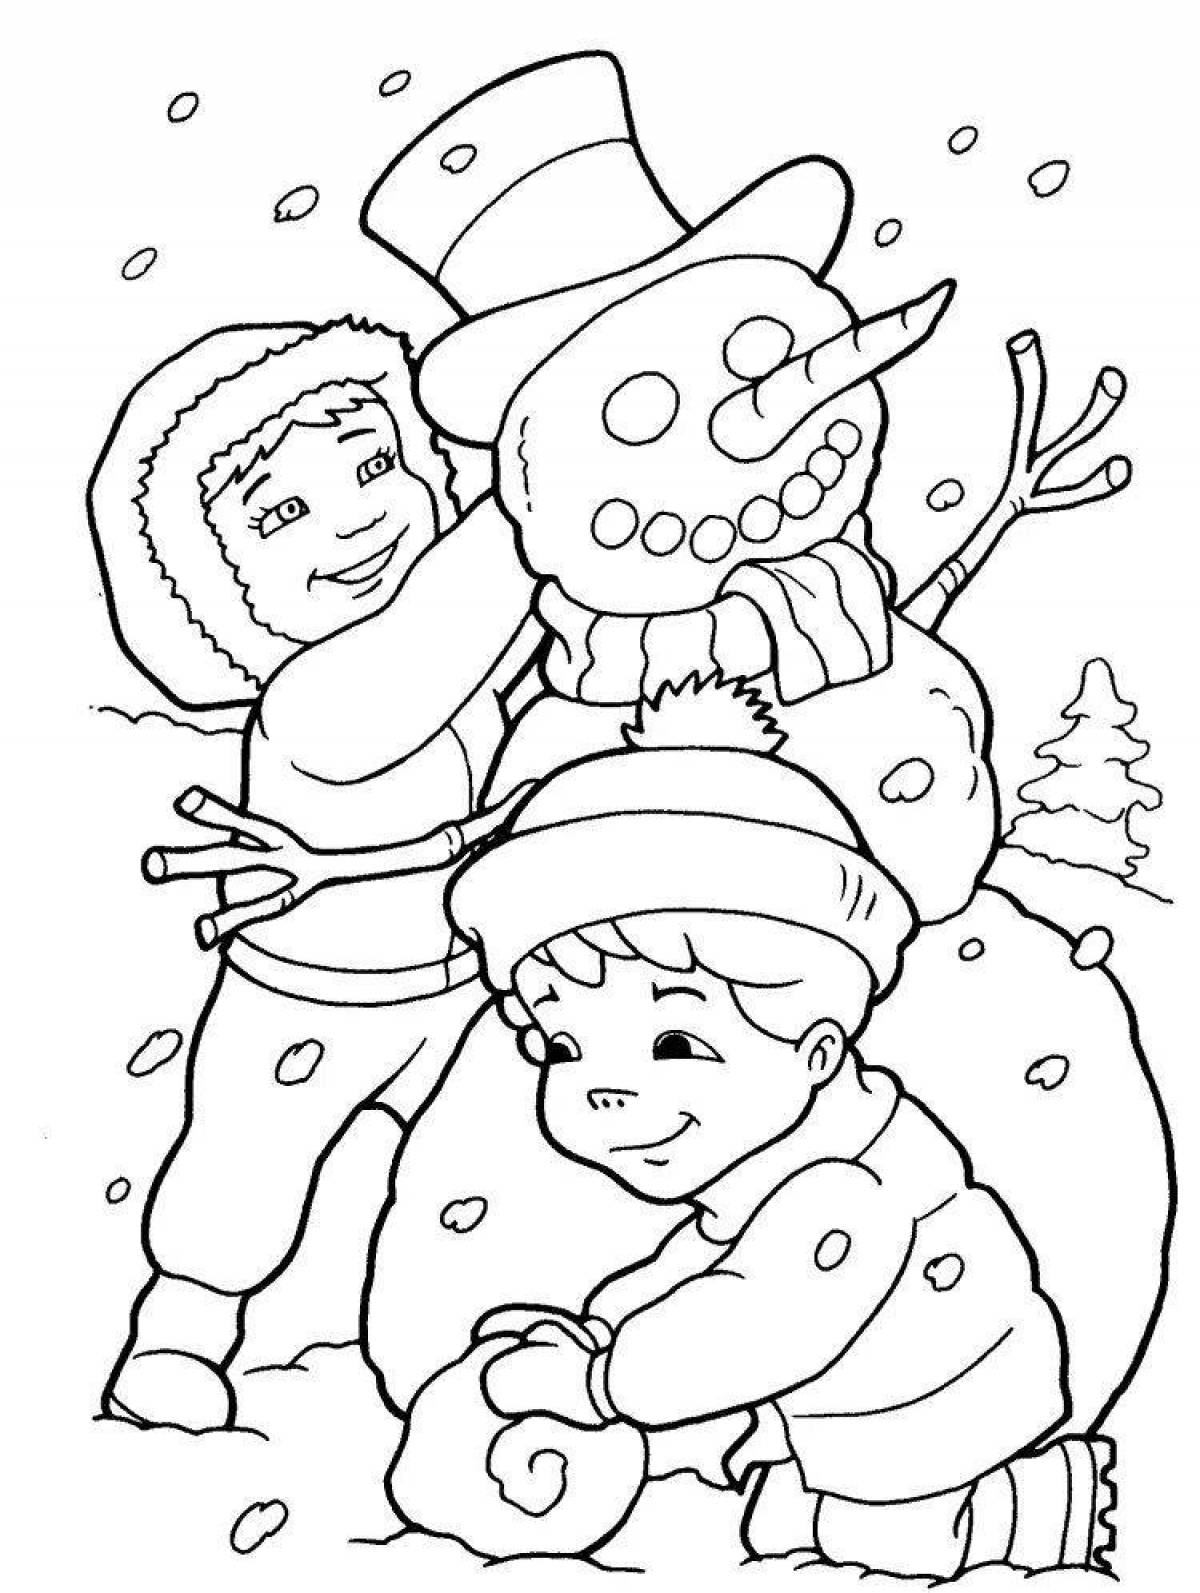 Great winter fun coloring page